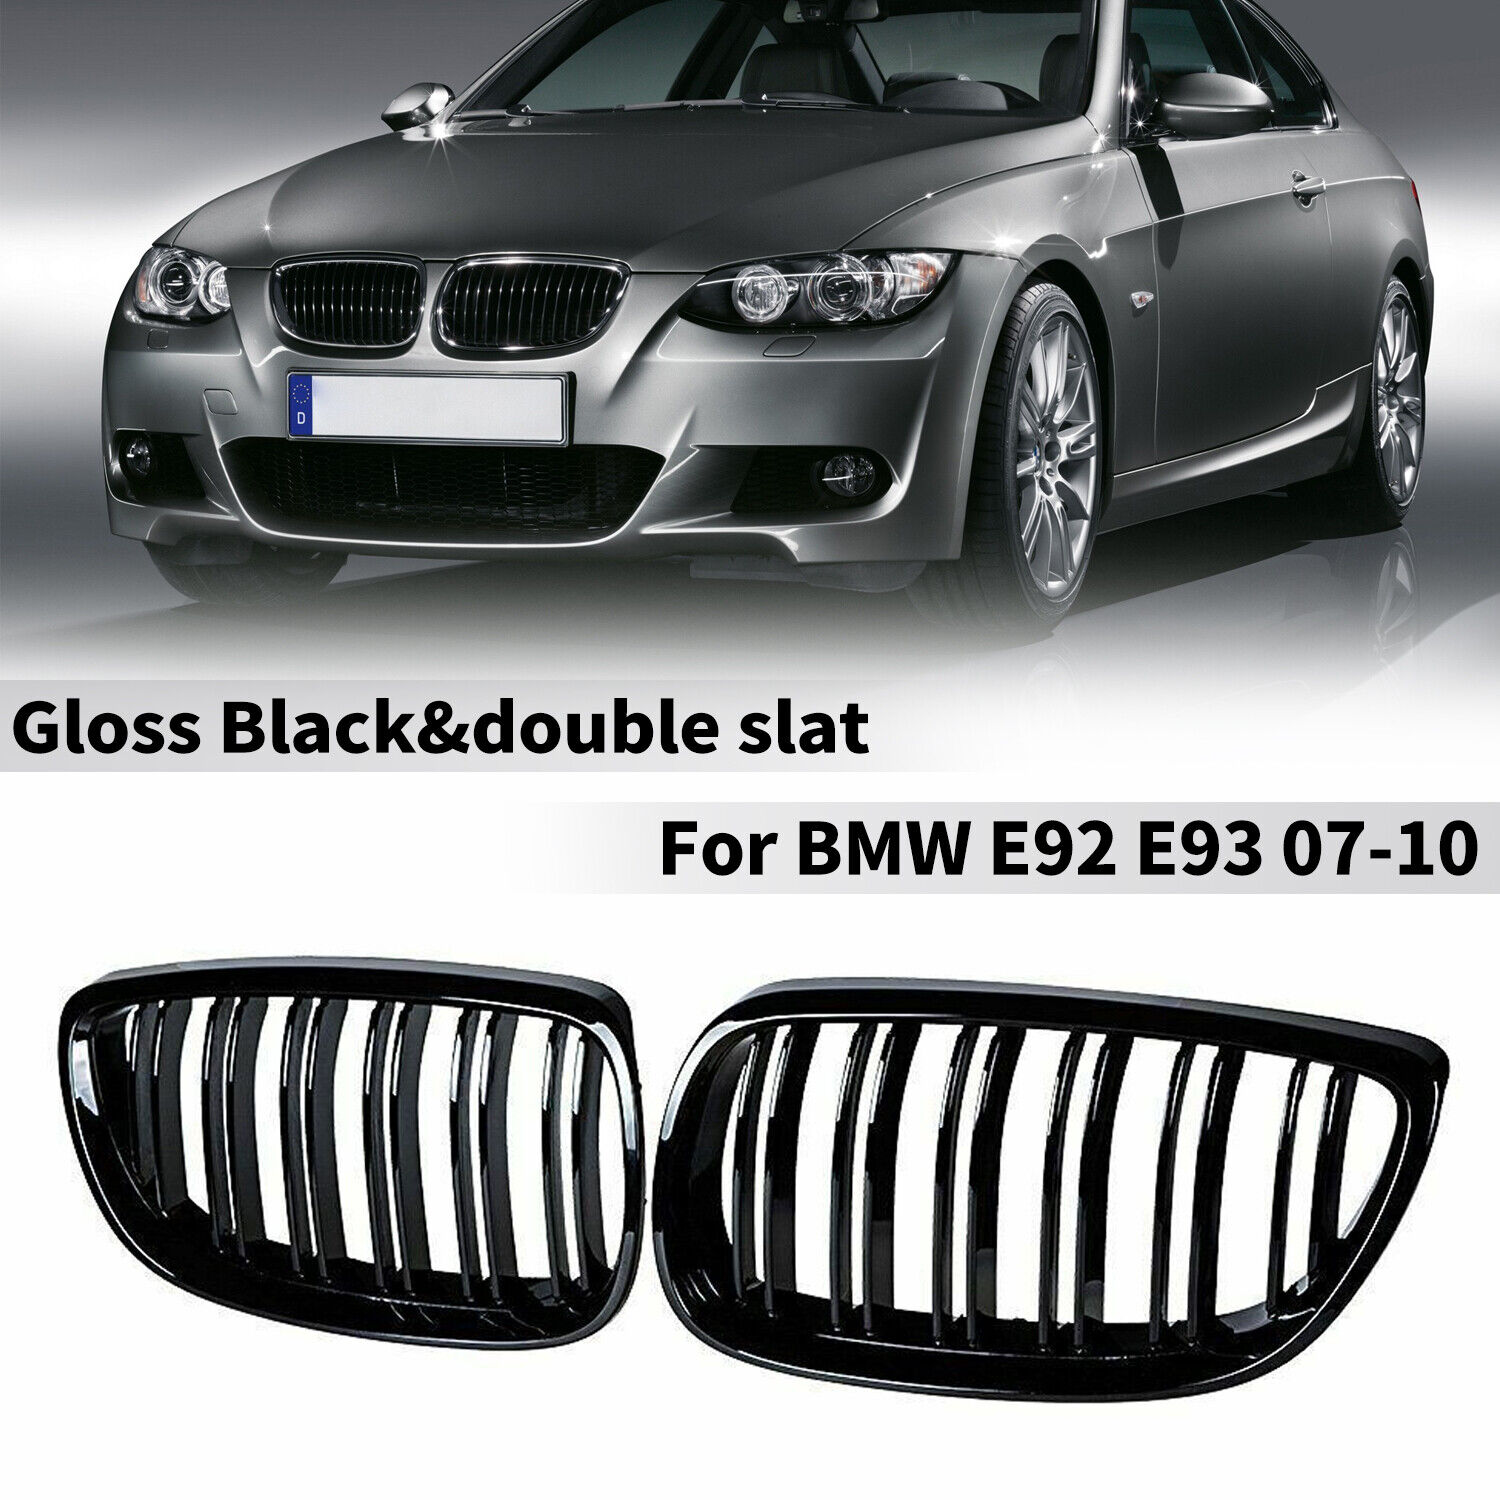 For BMW E92 E93 2007-10 Gloss Black Grill Grille M3 Style 328i 335i Coupe Kidney